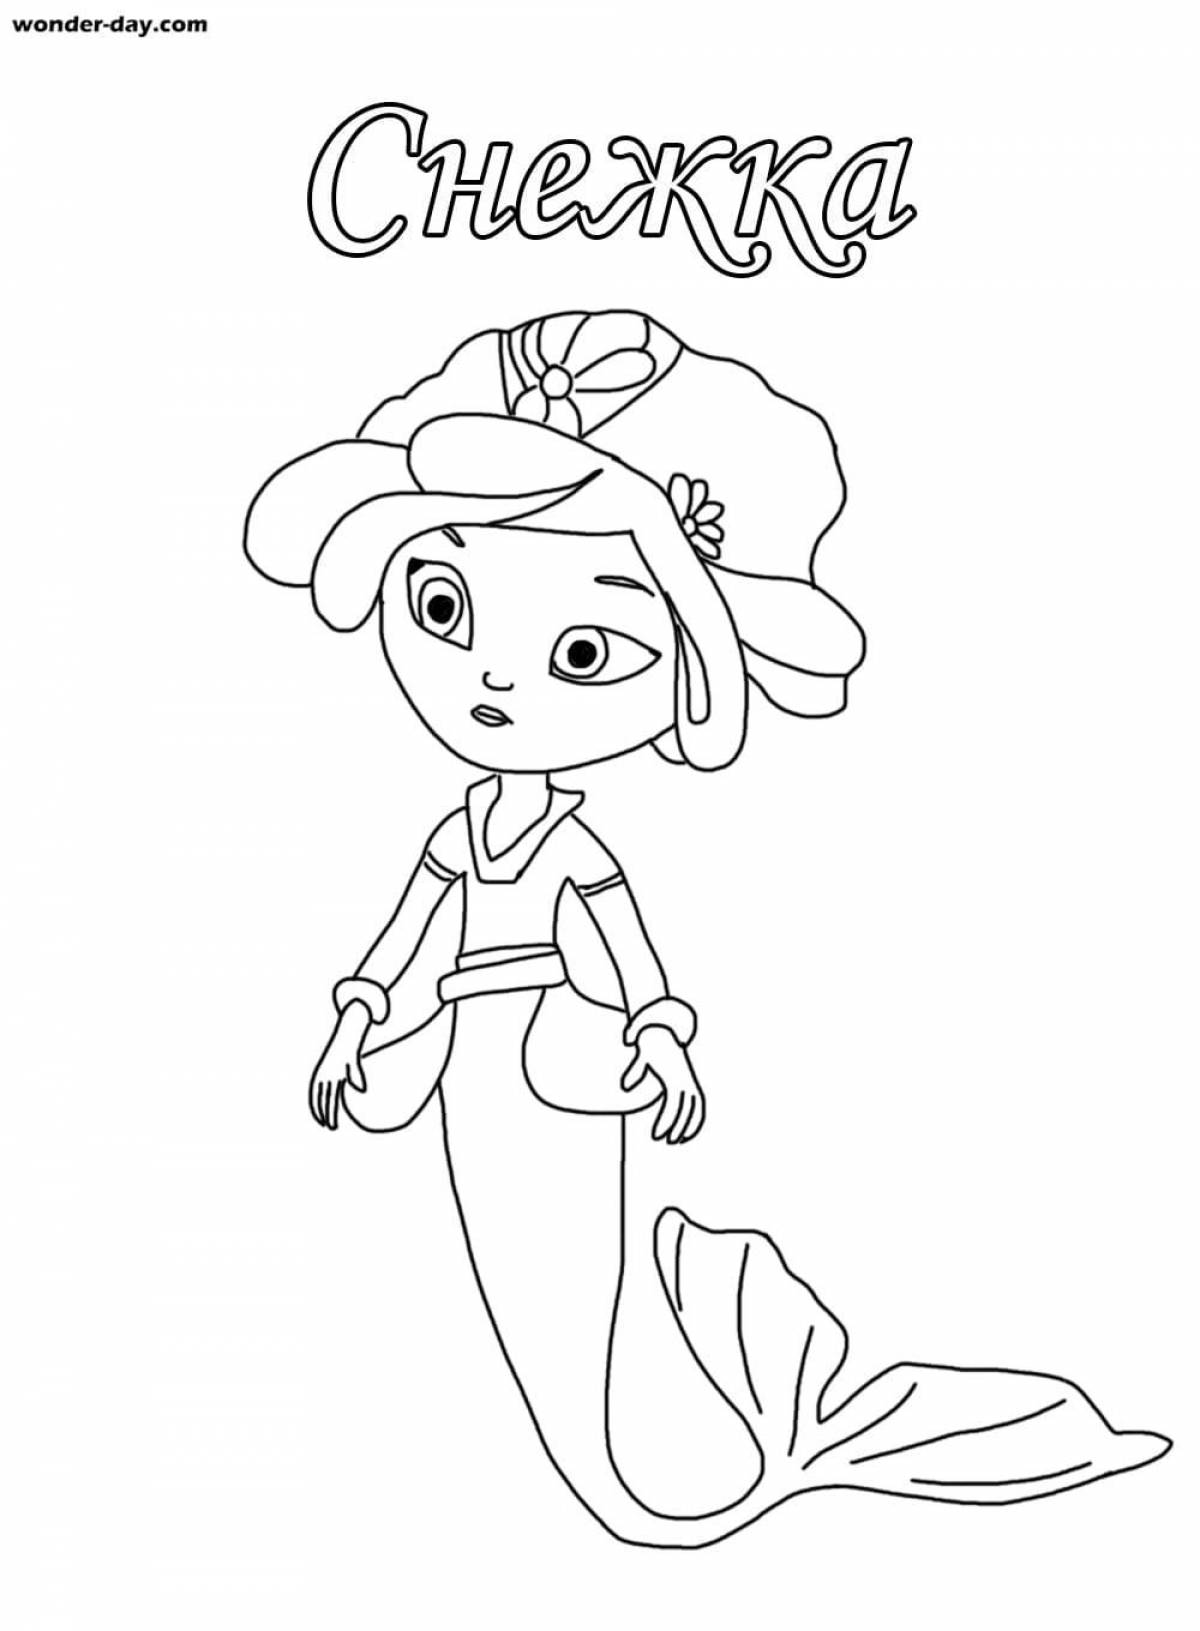 Awesome alice's fairy tale patrol coloring page